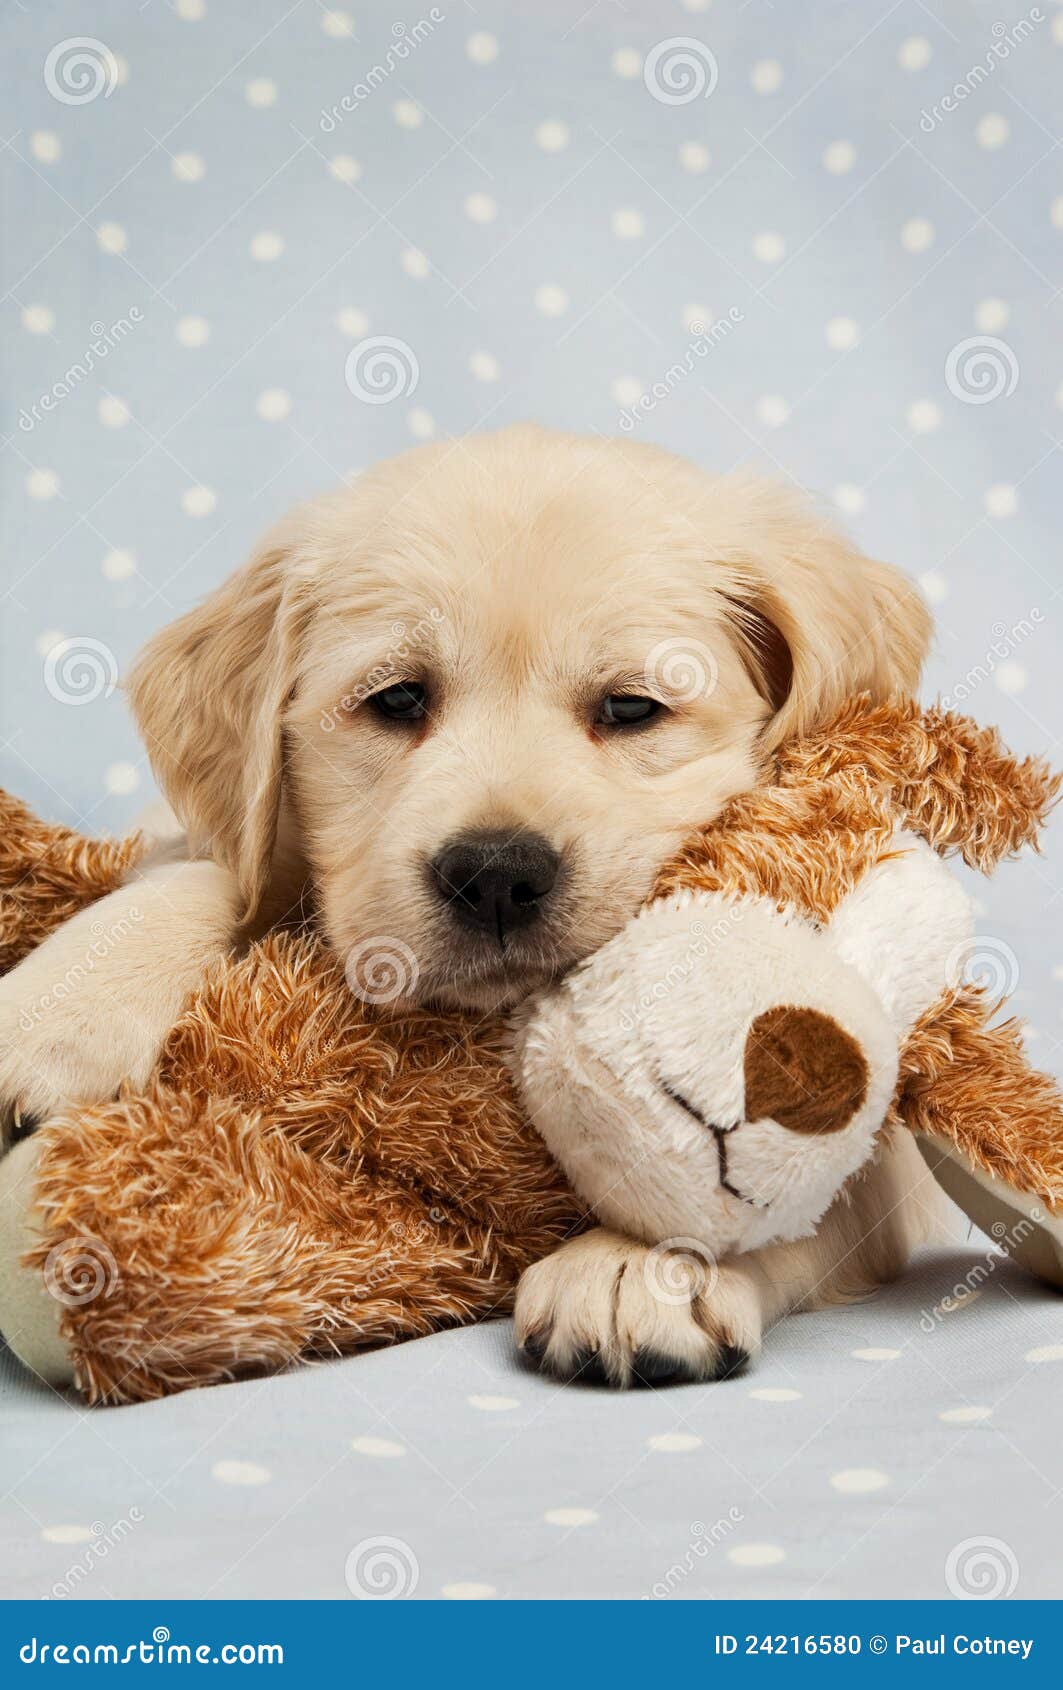 Golden Retriever Puppy and Teddy Bear Stock Photo Image of blond 